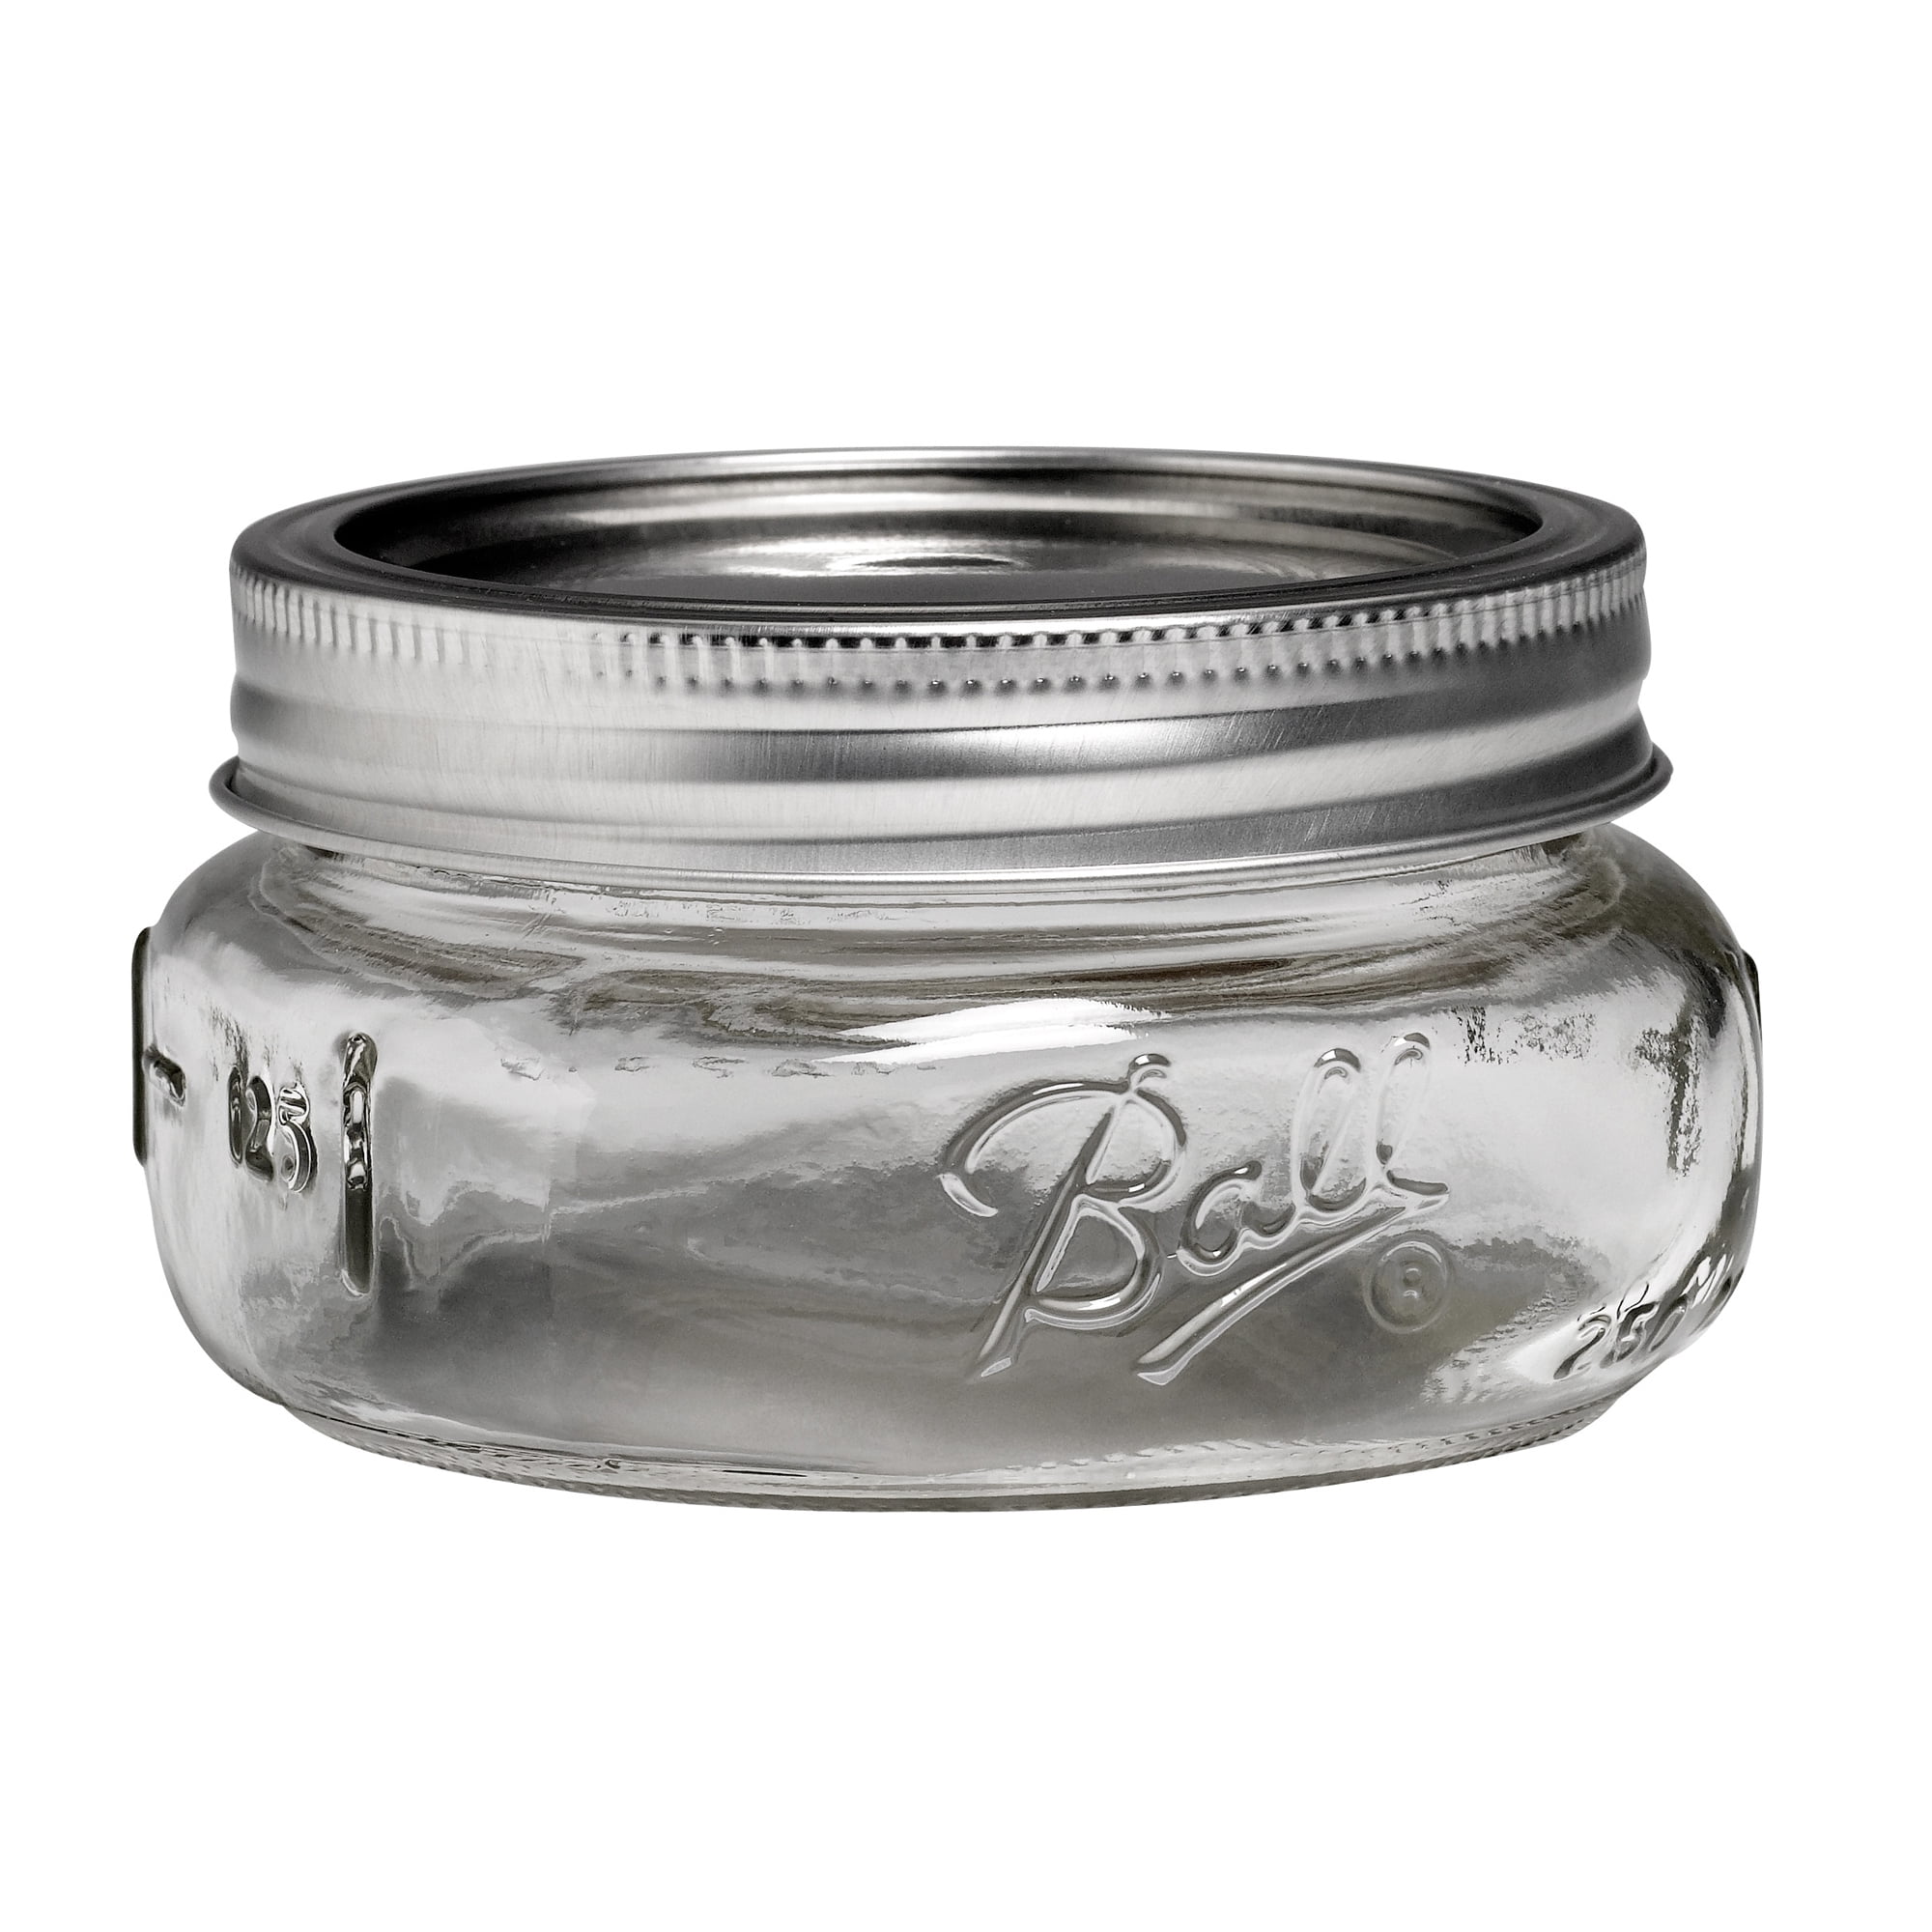 Wide Mouth Glass Jars